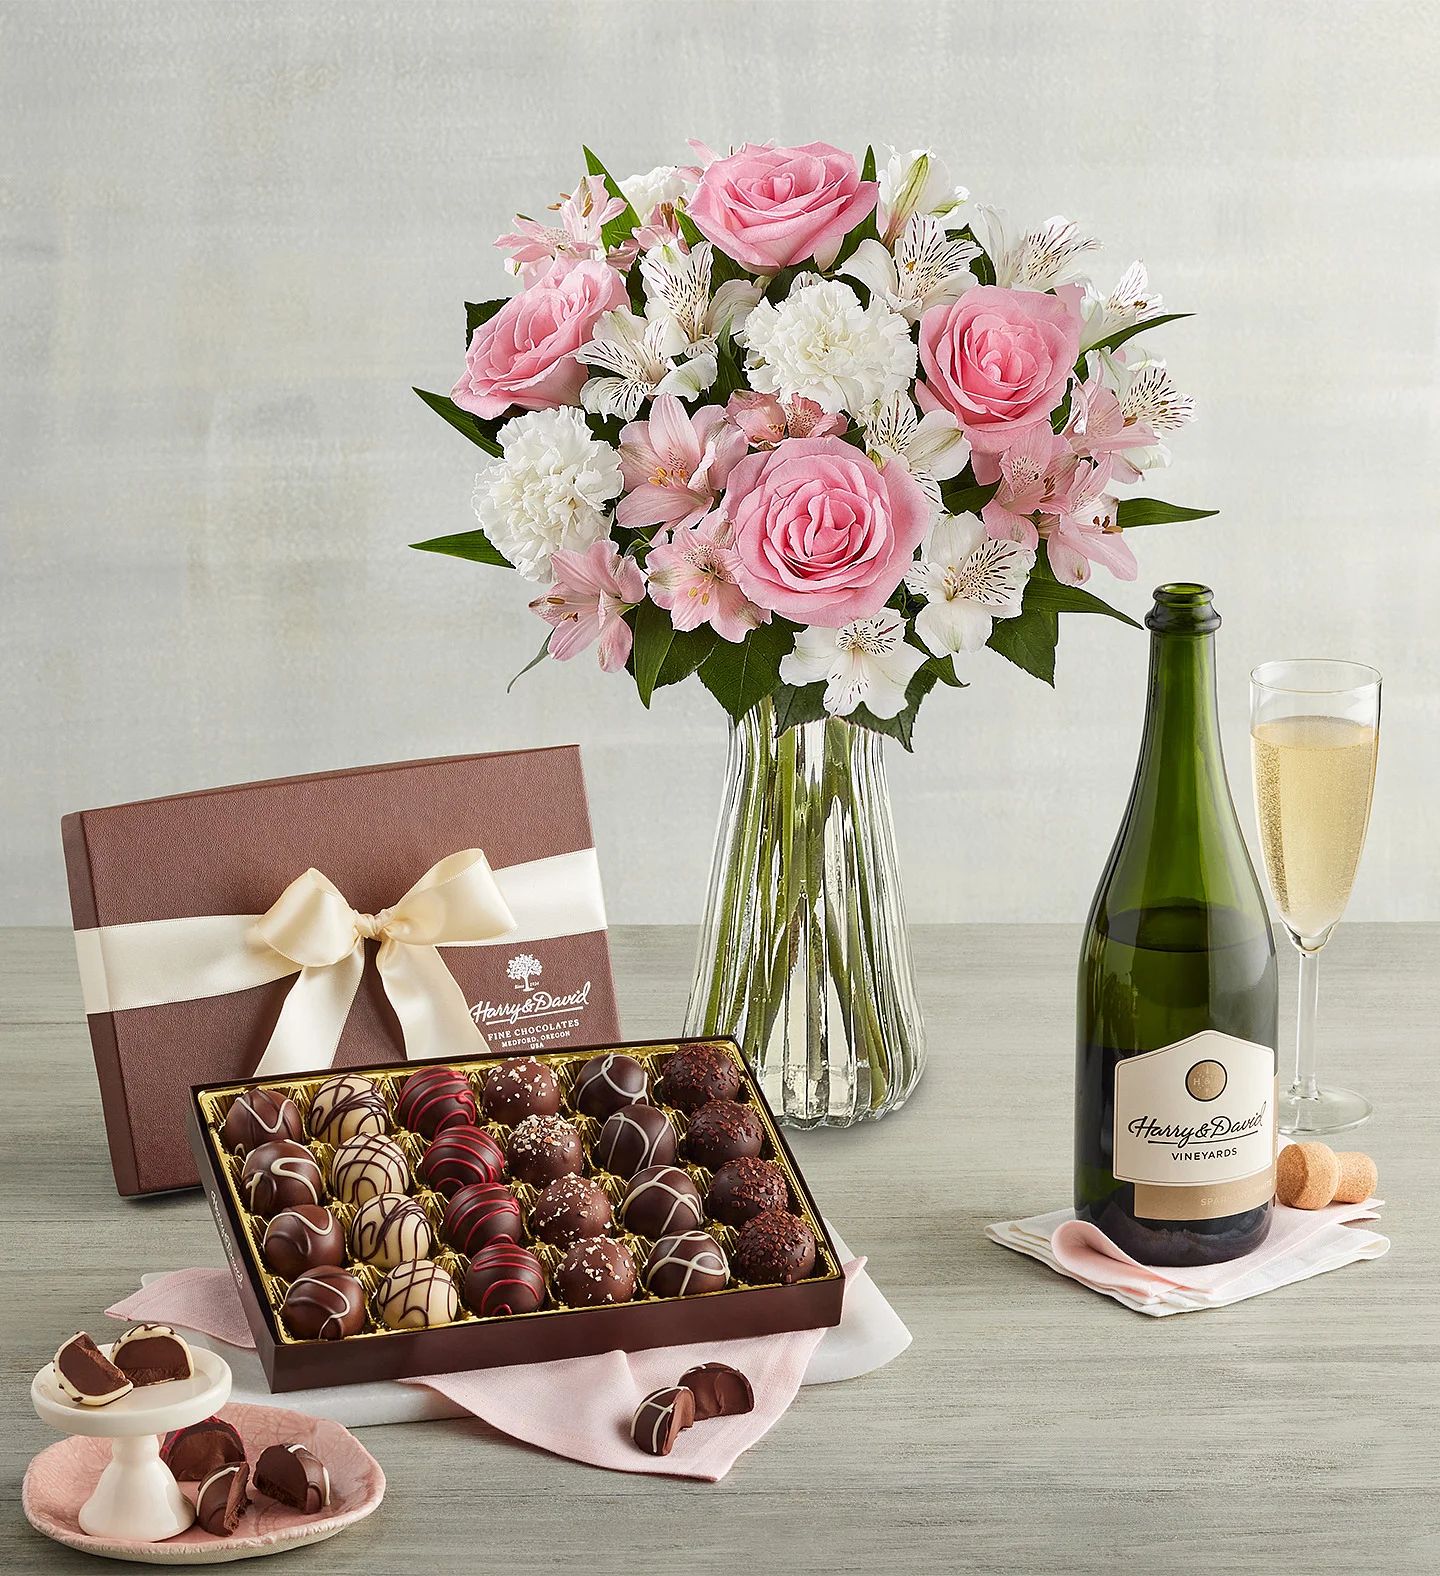 Mother's Day Cherished Blooms Bouquet, Chocolate Truffles, and Wine | 1800flowers.com